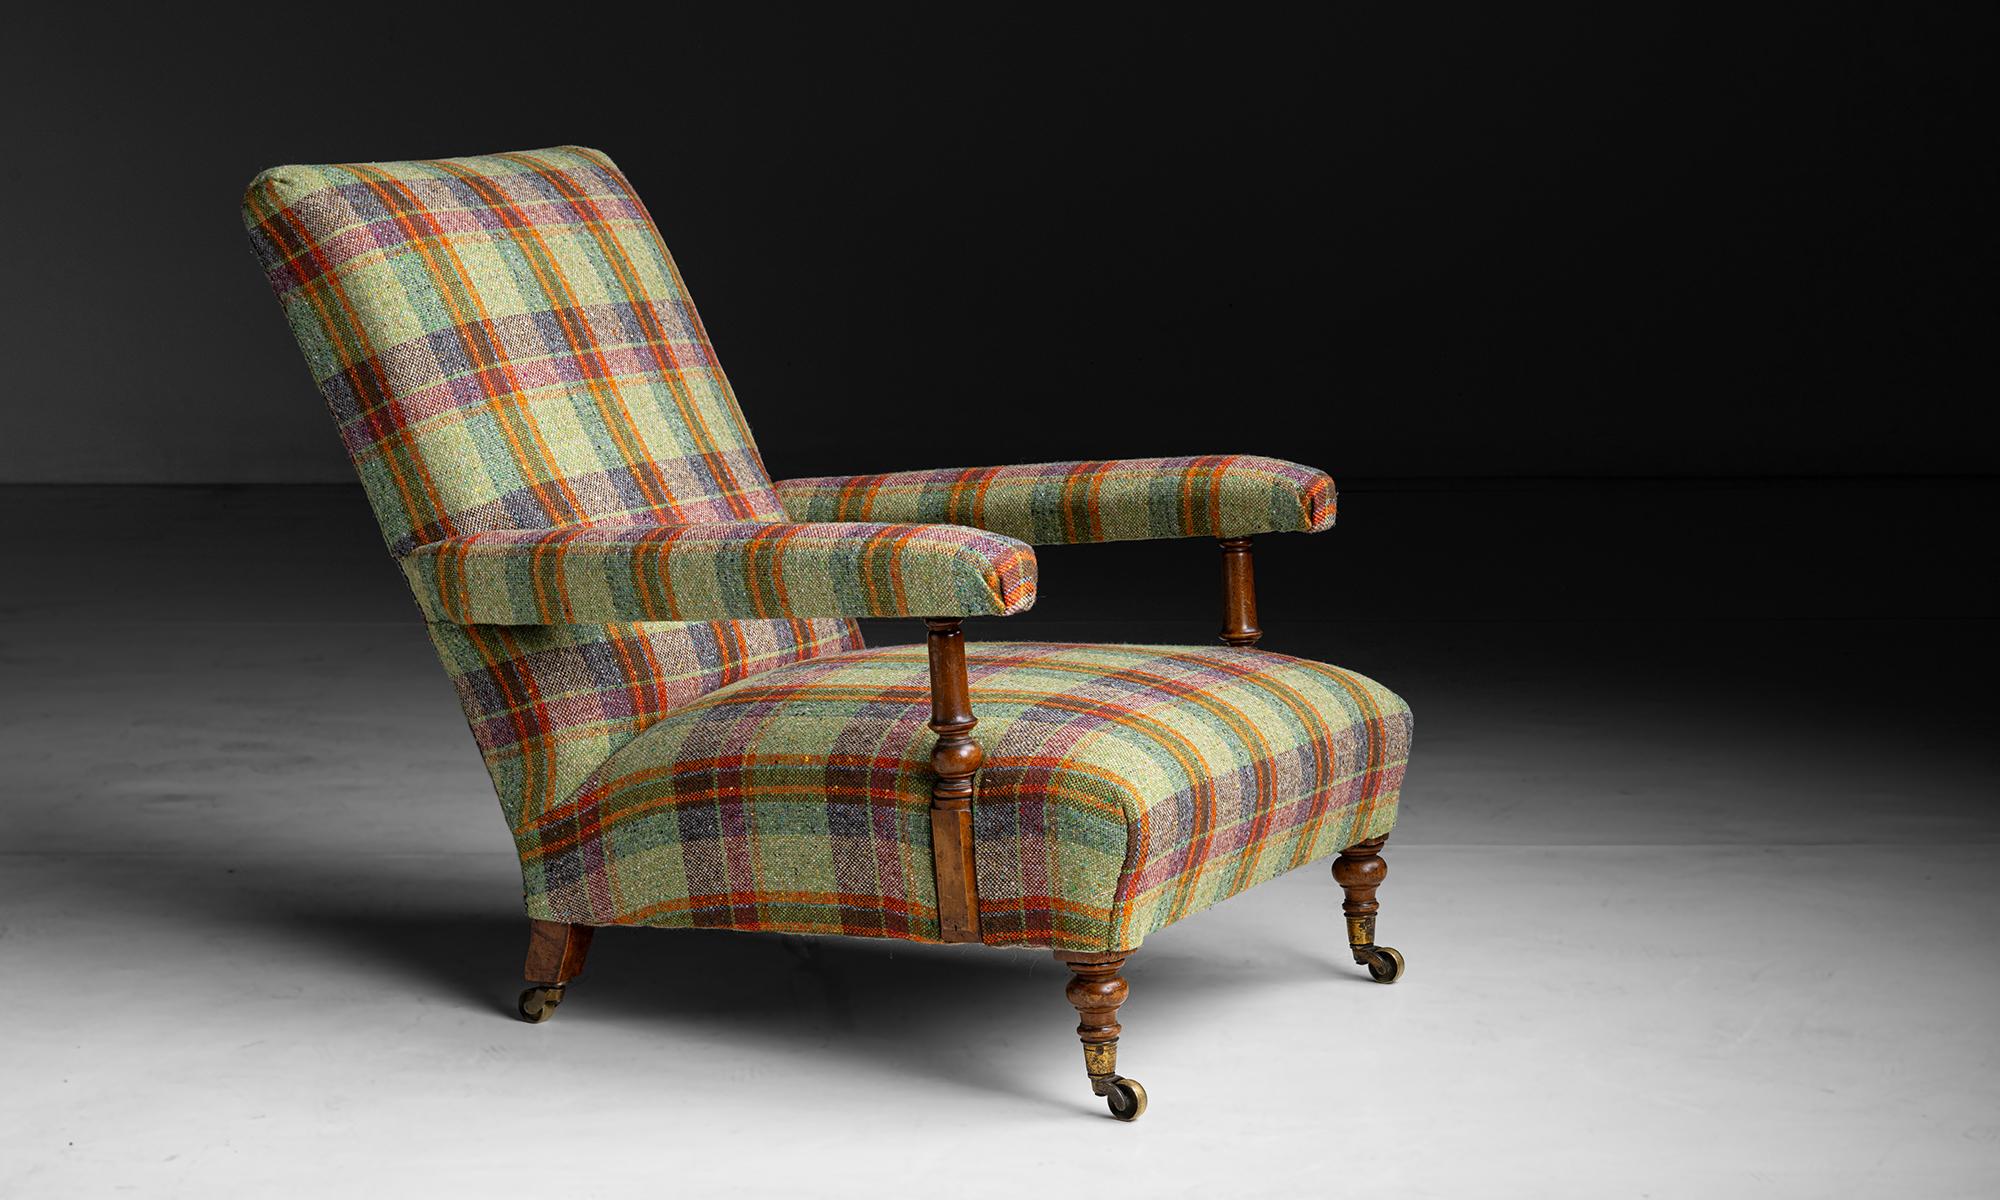 Howard & Sons Armchair in Tweed by Pierre Frey

England, 1871

Newly upholstered in Plaid Tweed by Pierre Frey, on carved antique frame with Cope castors. Stamped 1871 on the back leg.

Measures 29.5”w x 48”d x 32”h x 12”seat